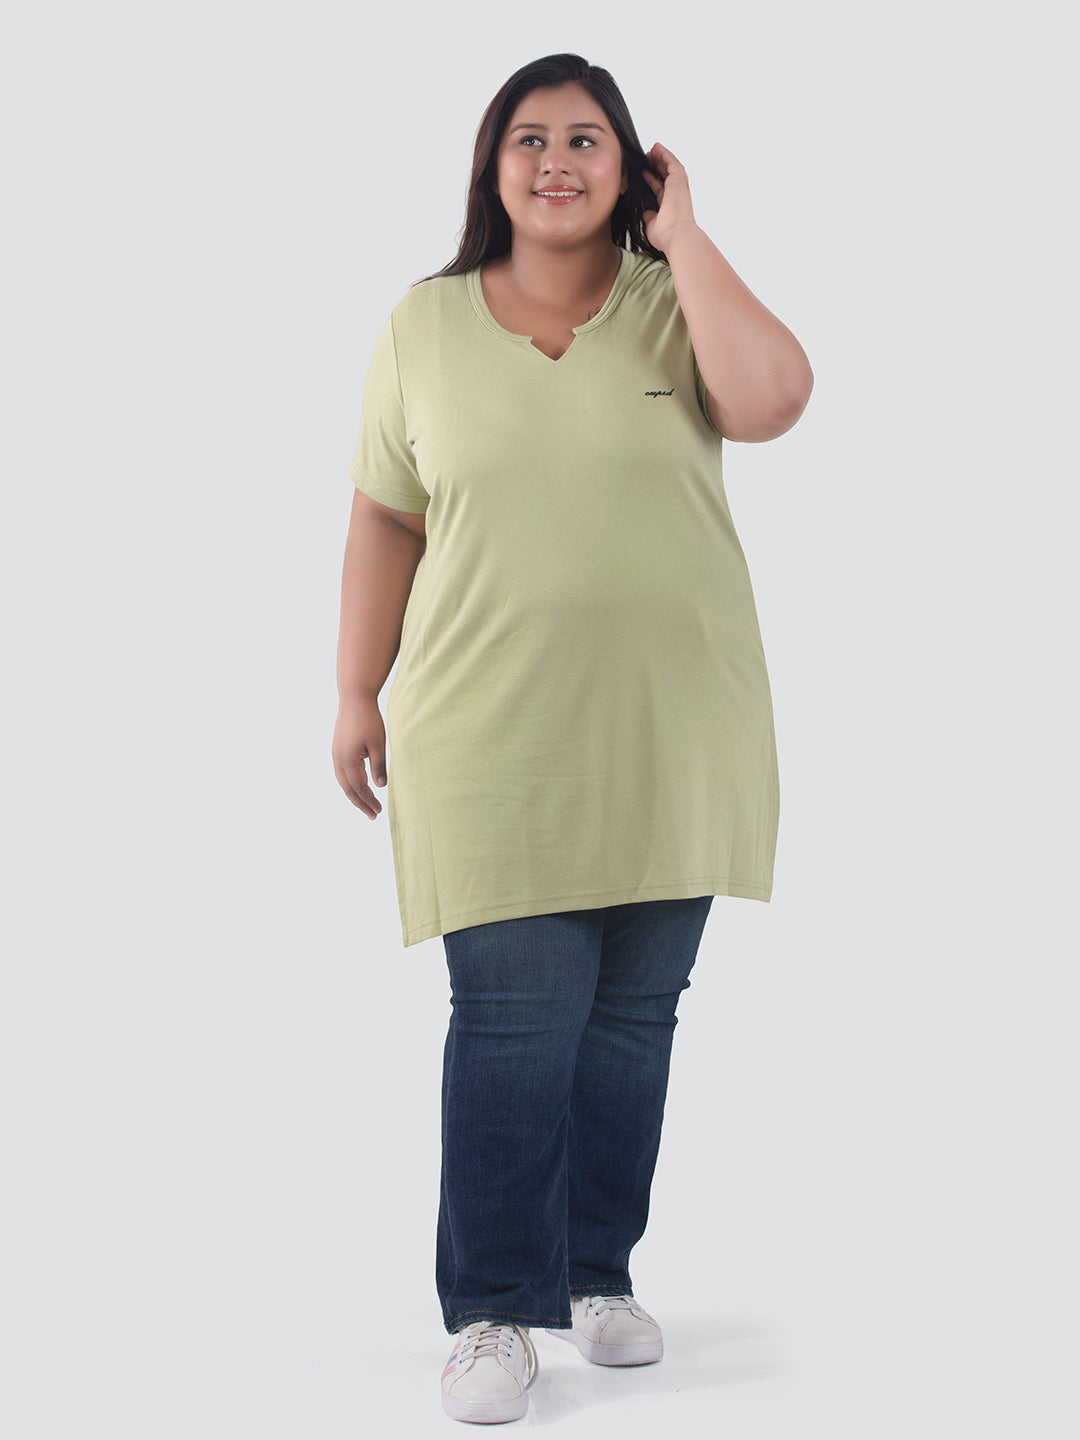 Comfortable Plus Size Half Sleeves Long Top For Women (Pack Of 2) Online In India